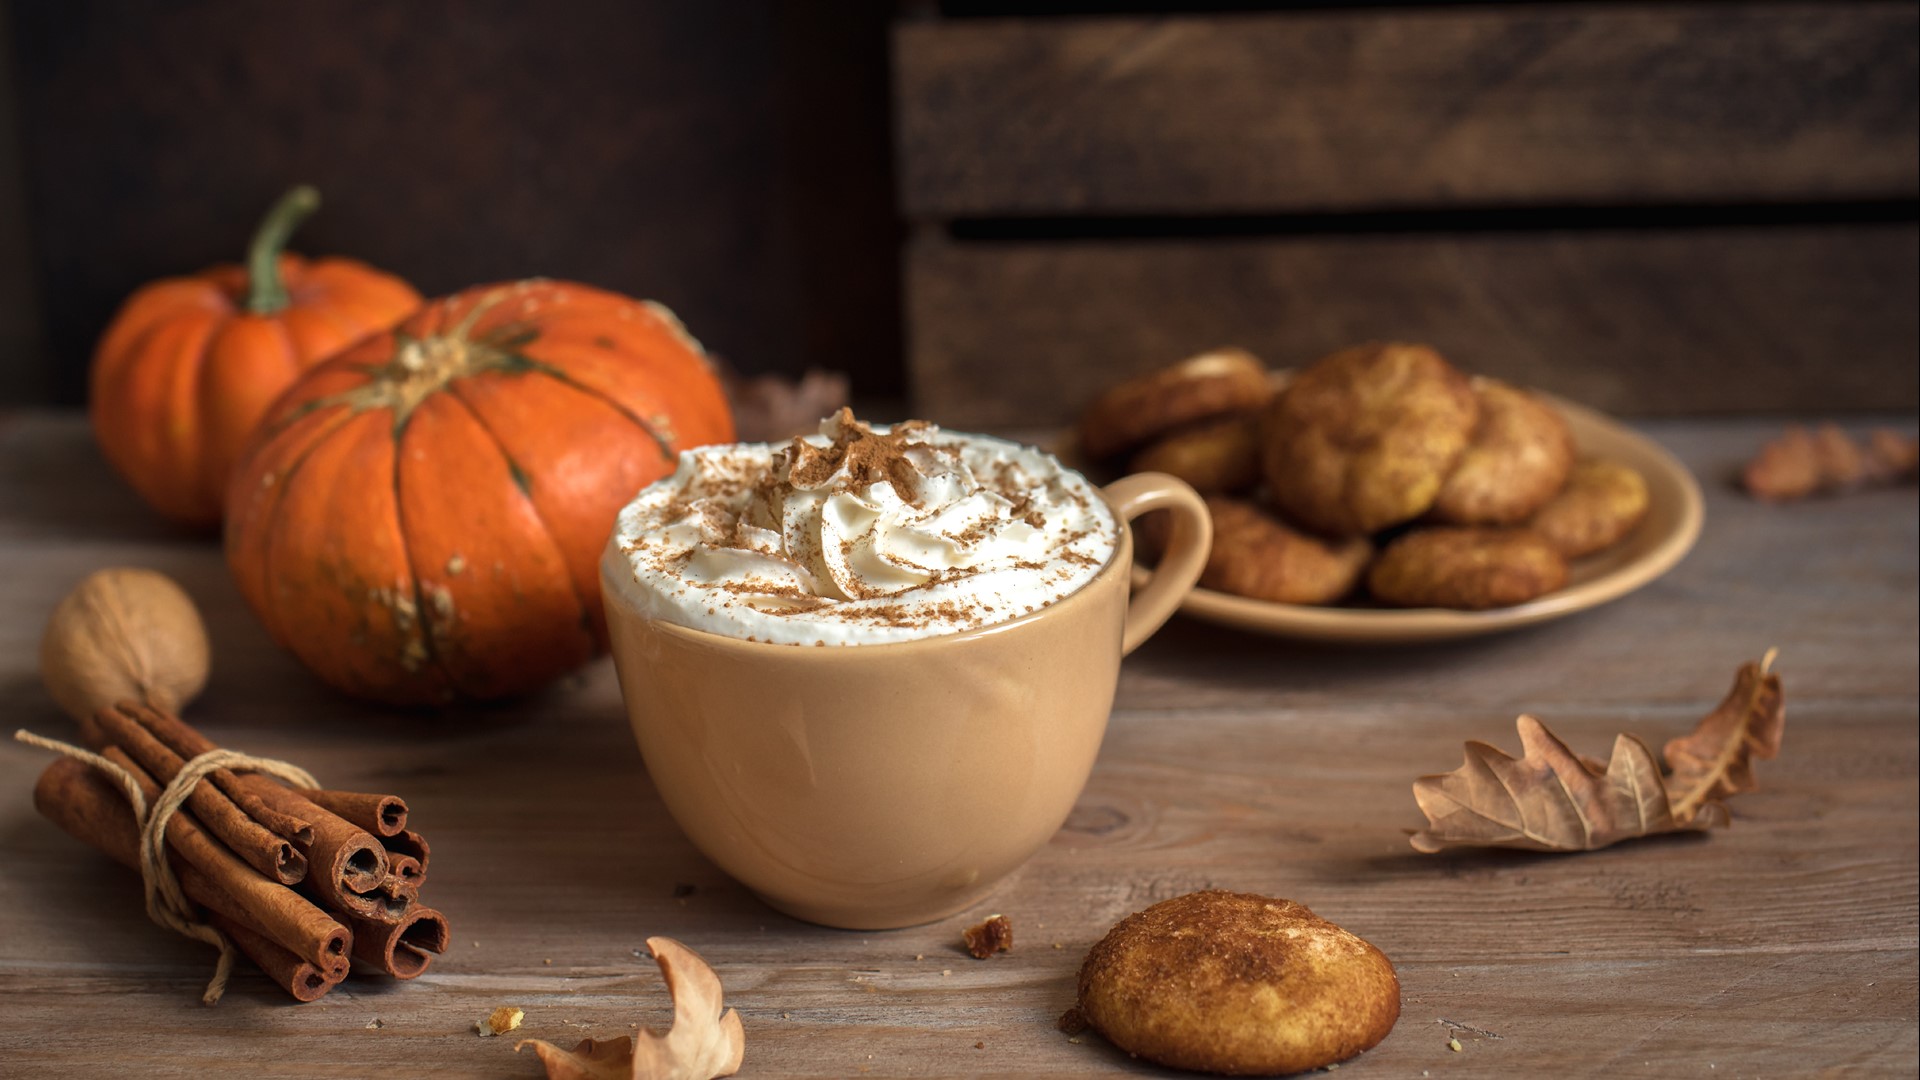 These cold temperatures making you want to snuggle up under a blanket with a warm beverage? Make a pumpkin spice latte!